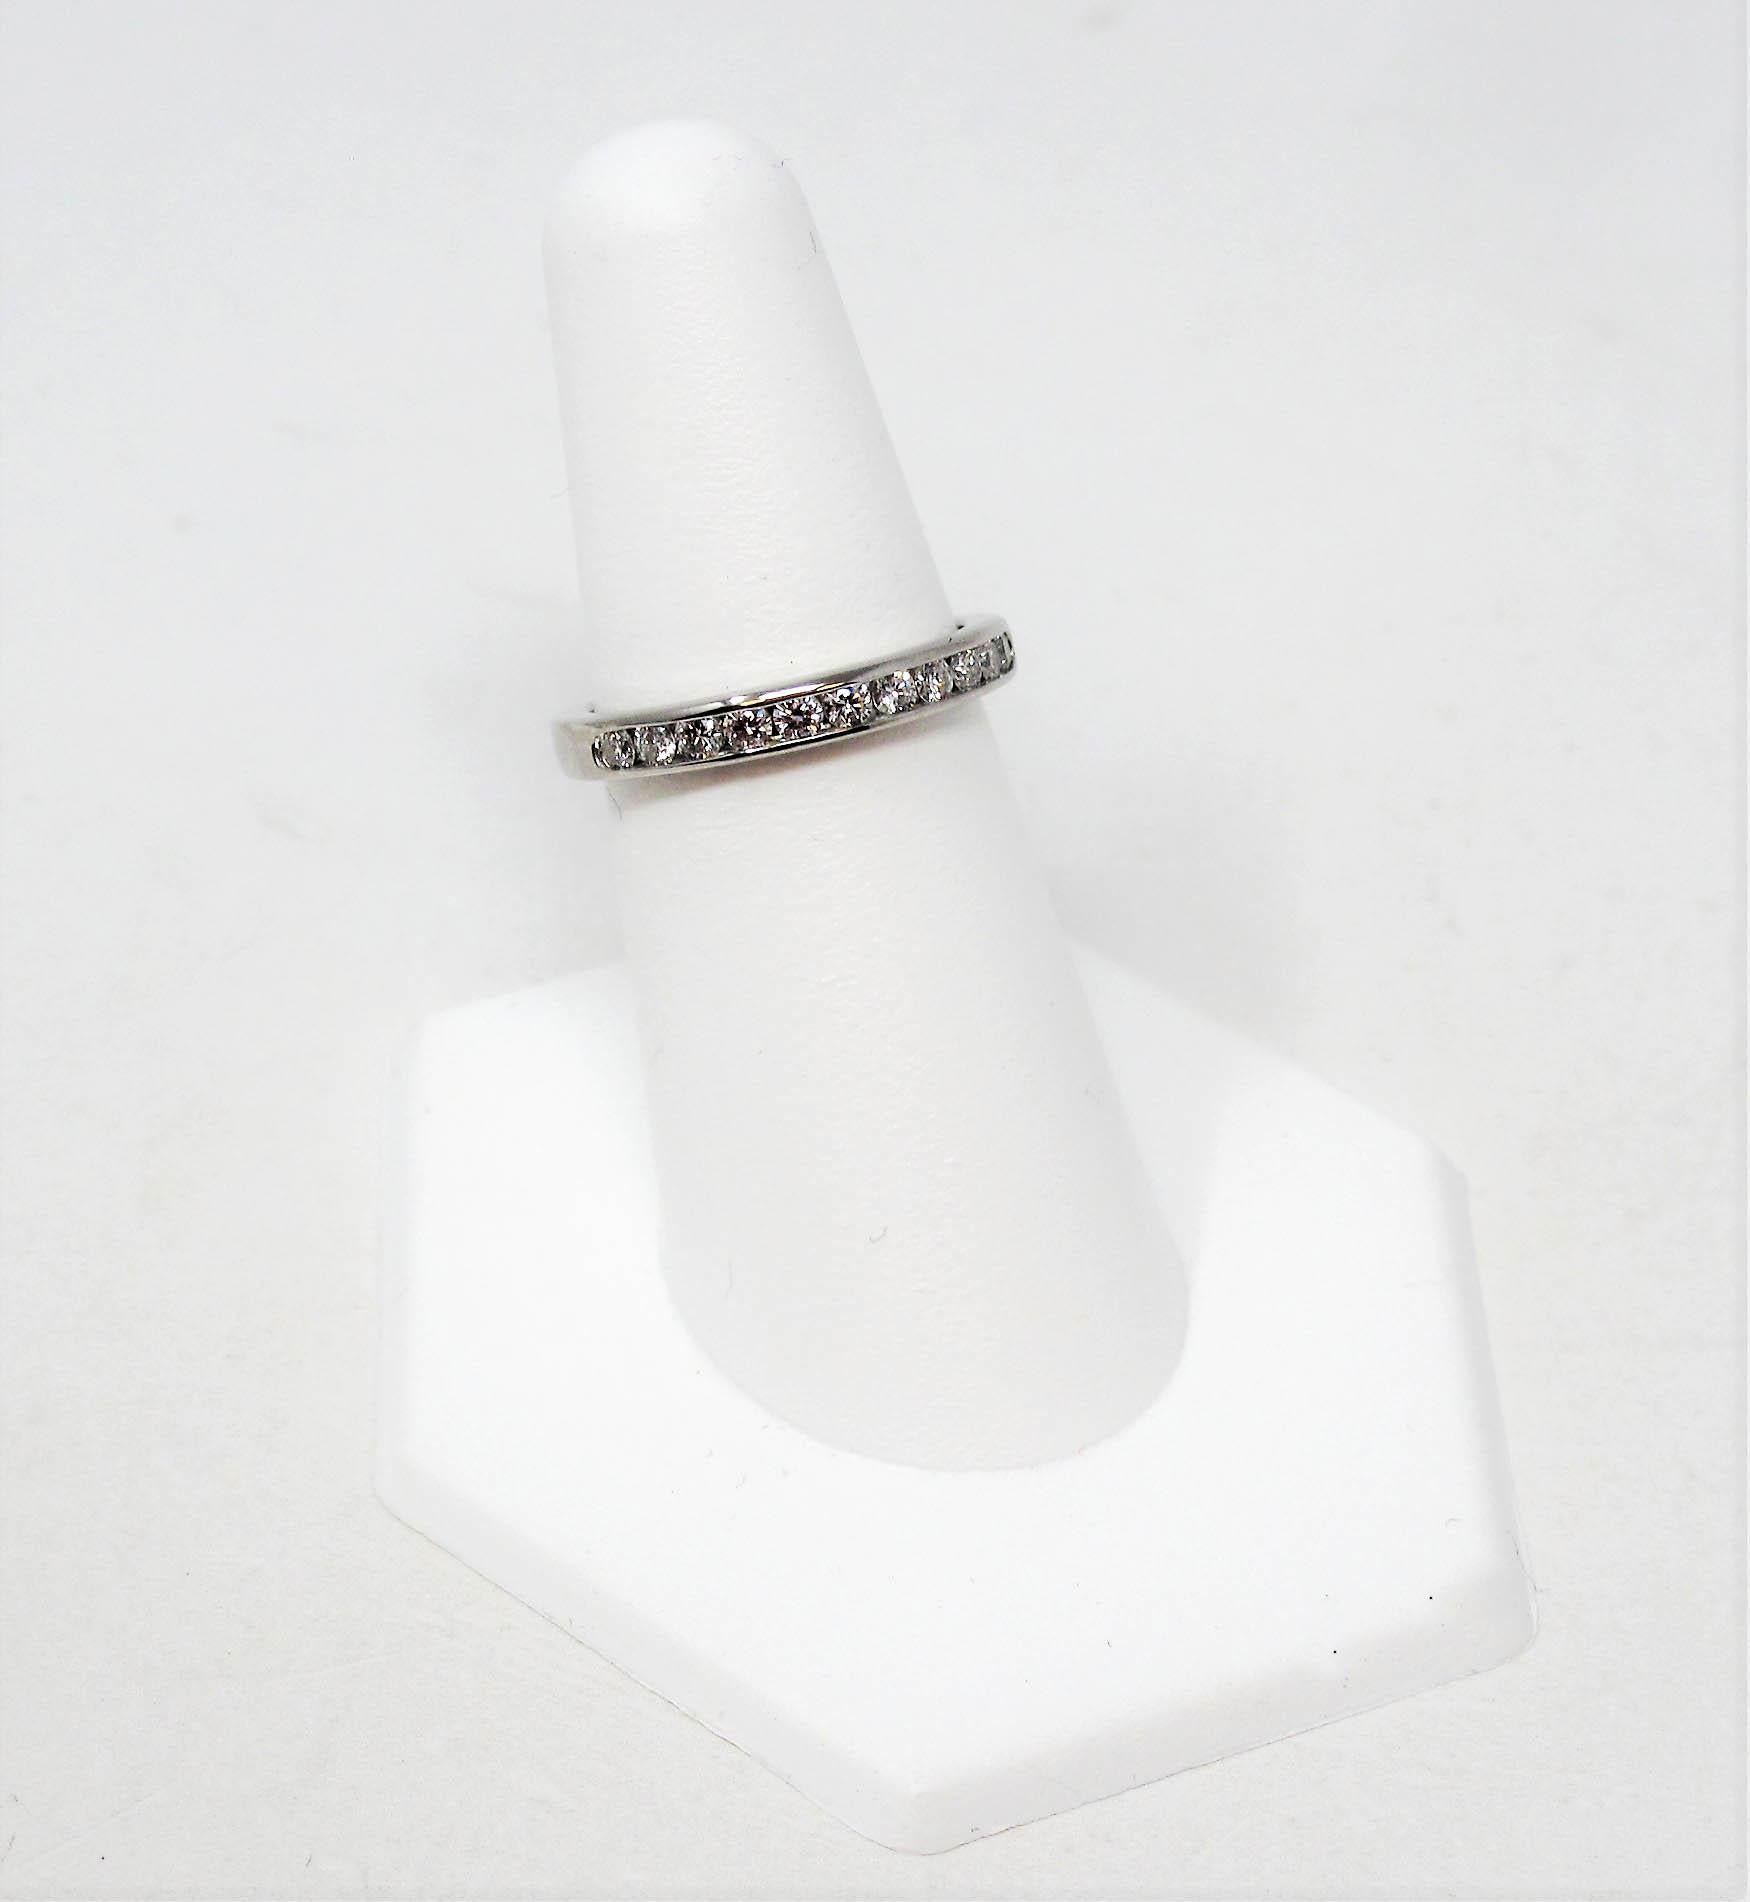 Tiffany & Co. Channel Set Semi Eternity Diamond Anniversary Band Ring Platinum In Excellent Condition For Sale In Scottsdale, AZ